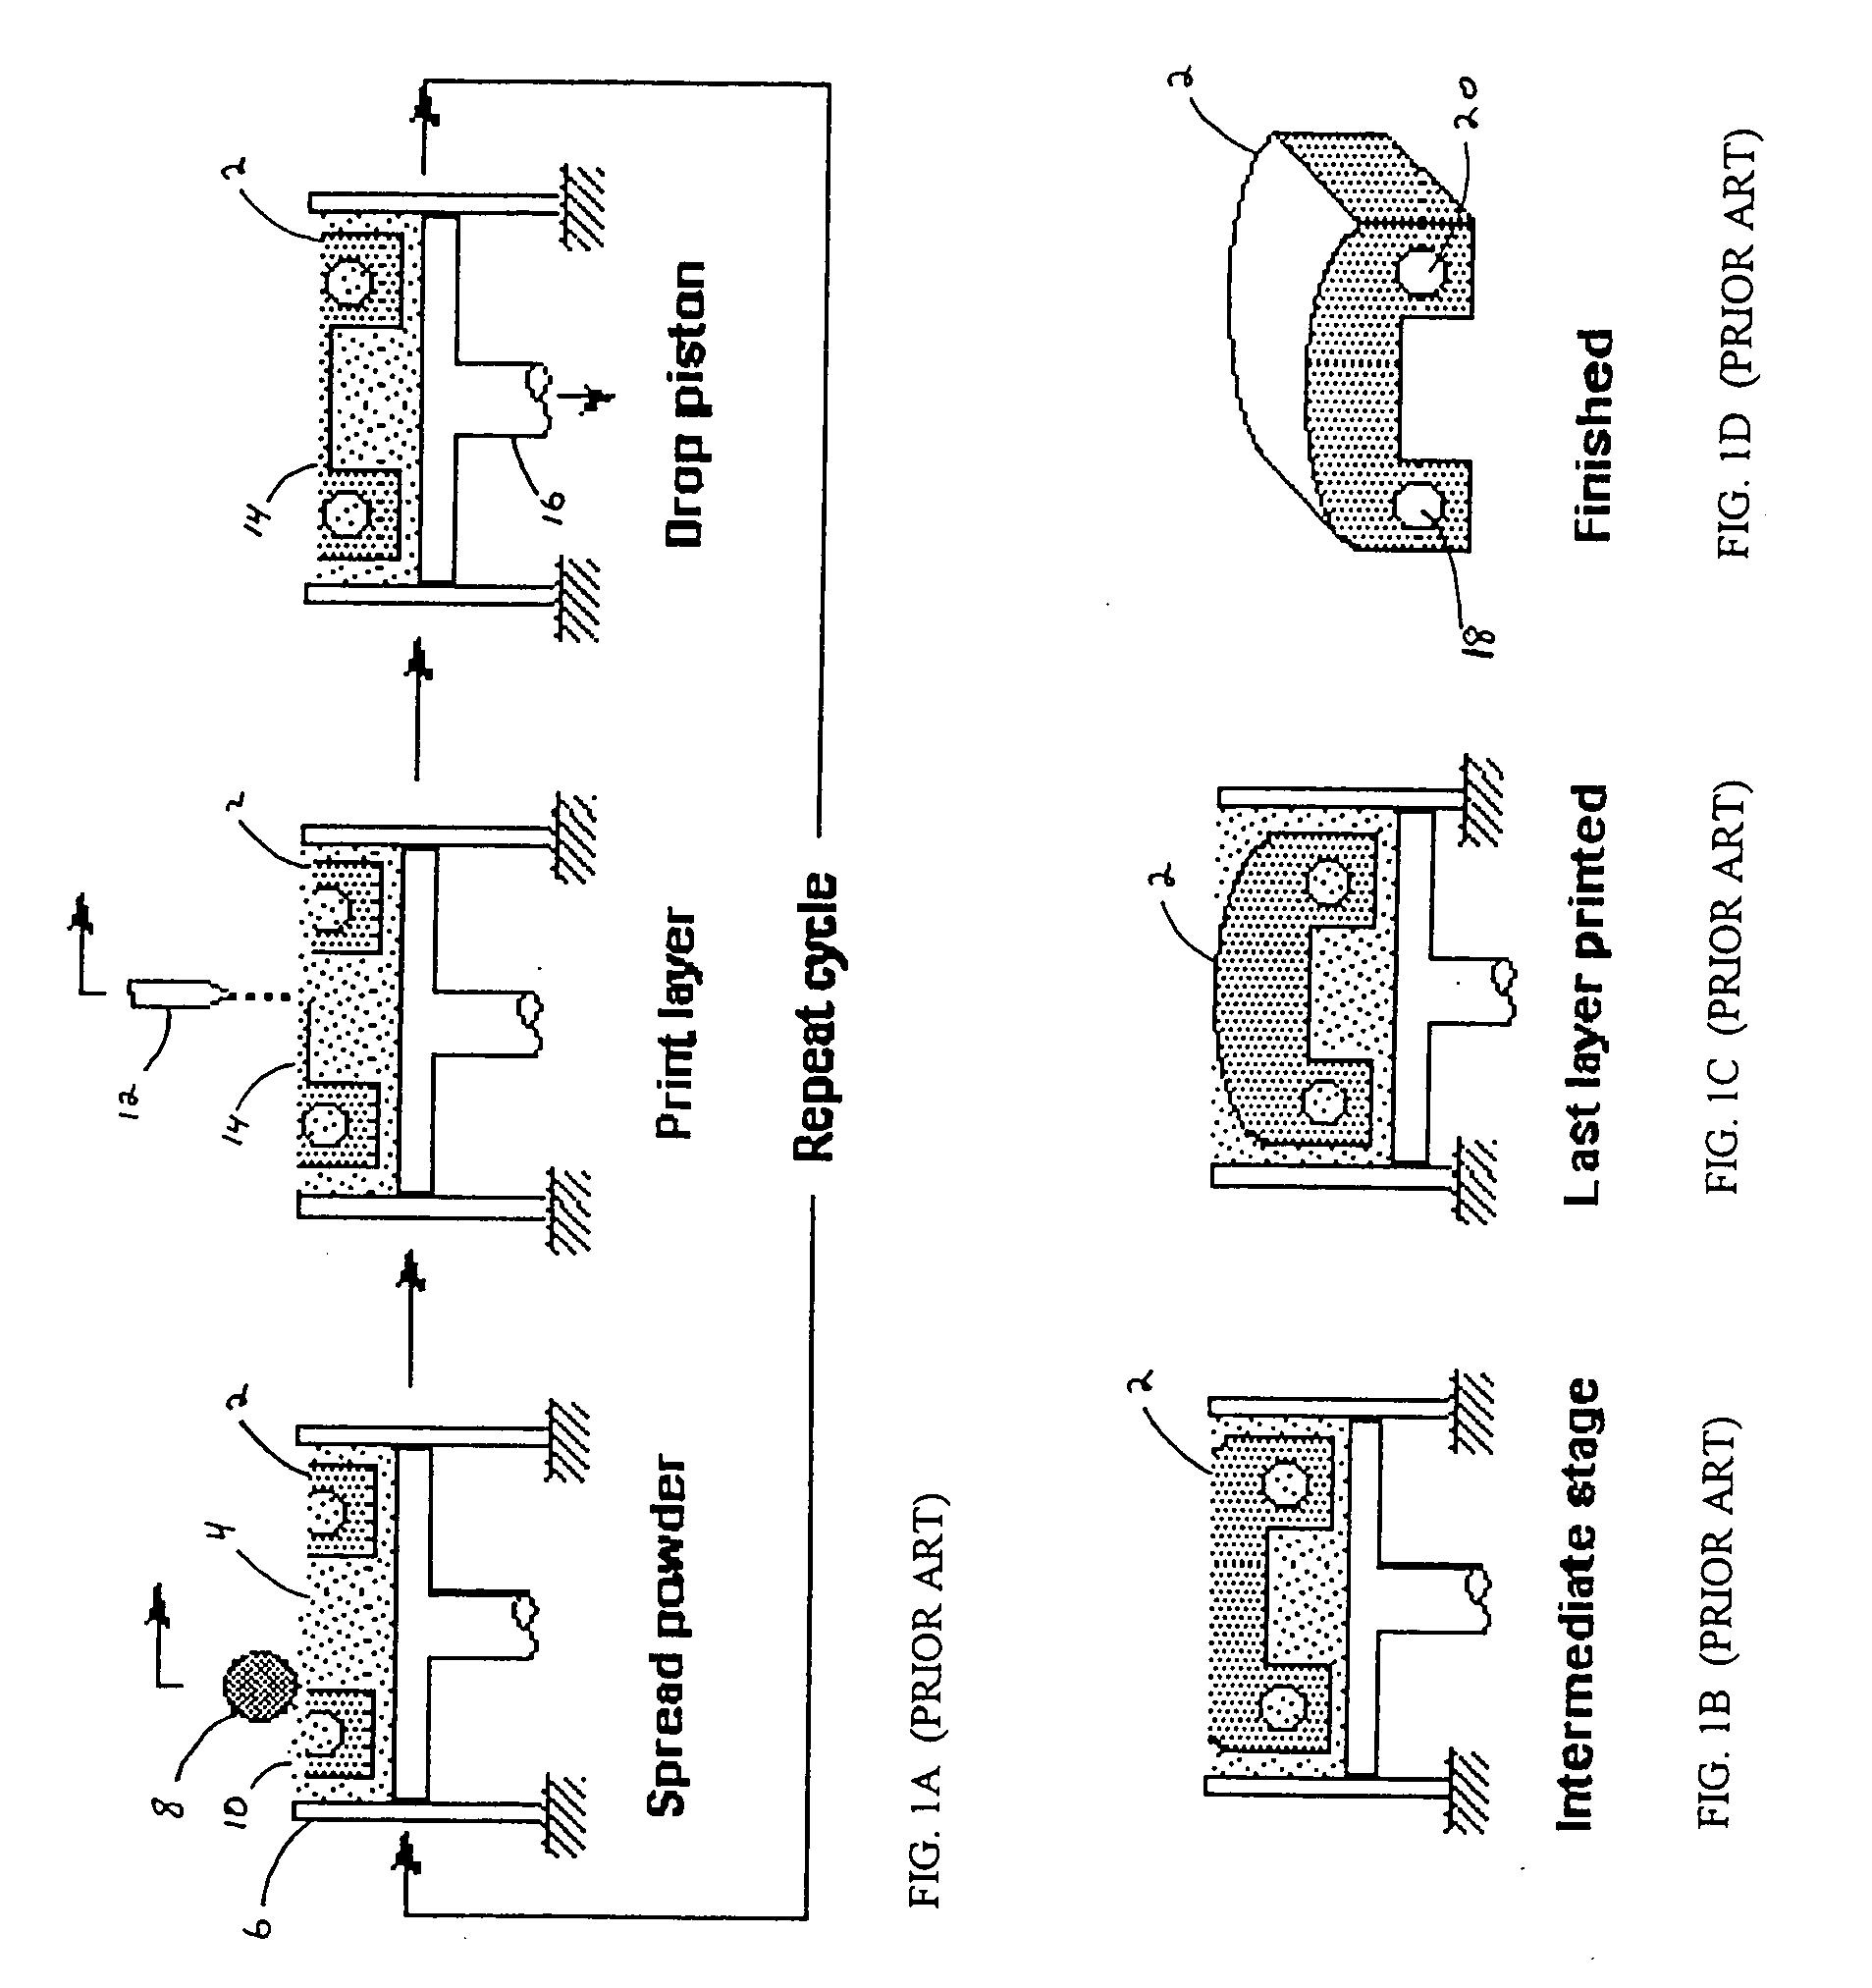 Novel casting process and articles for performing same